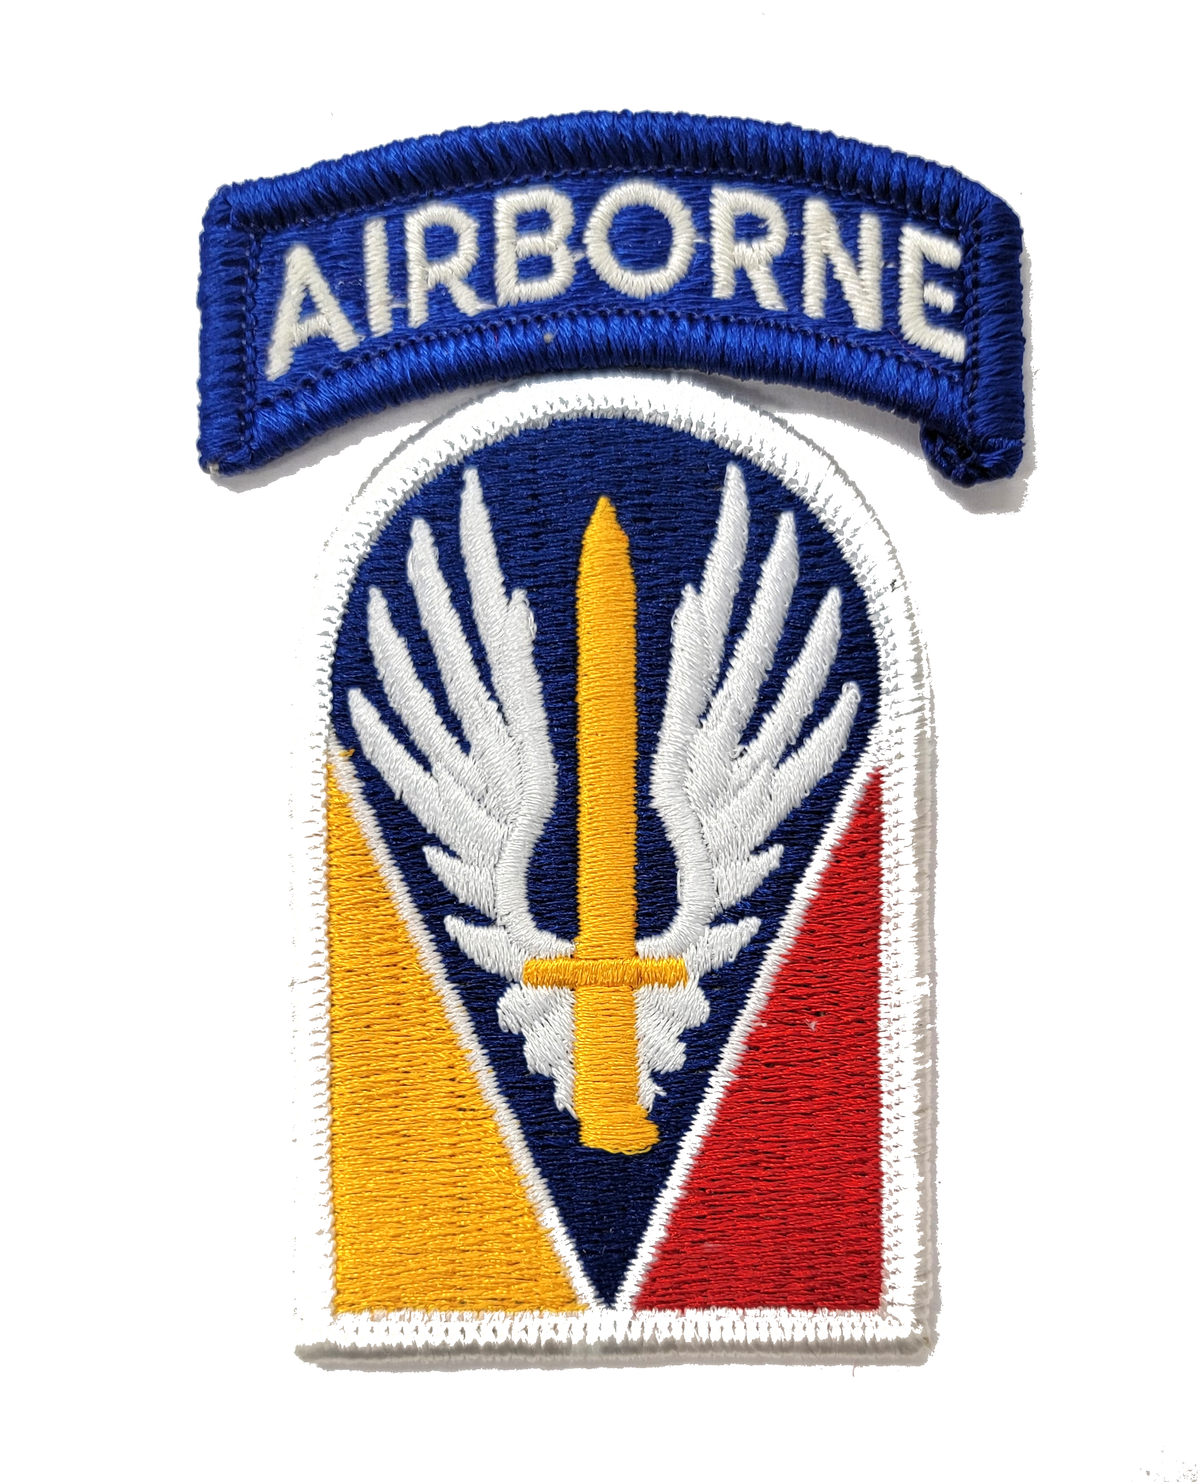 Joint Readiness Command Patch - Full Color